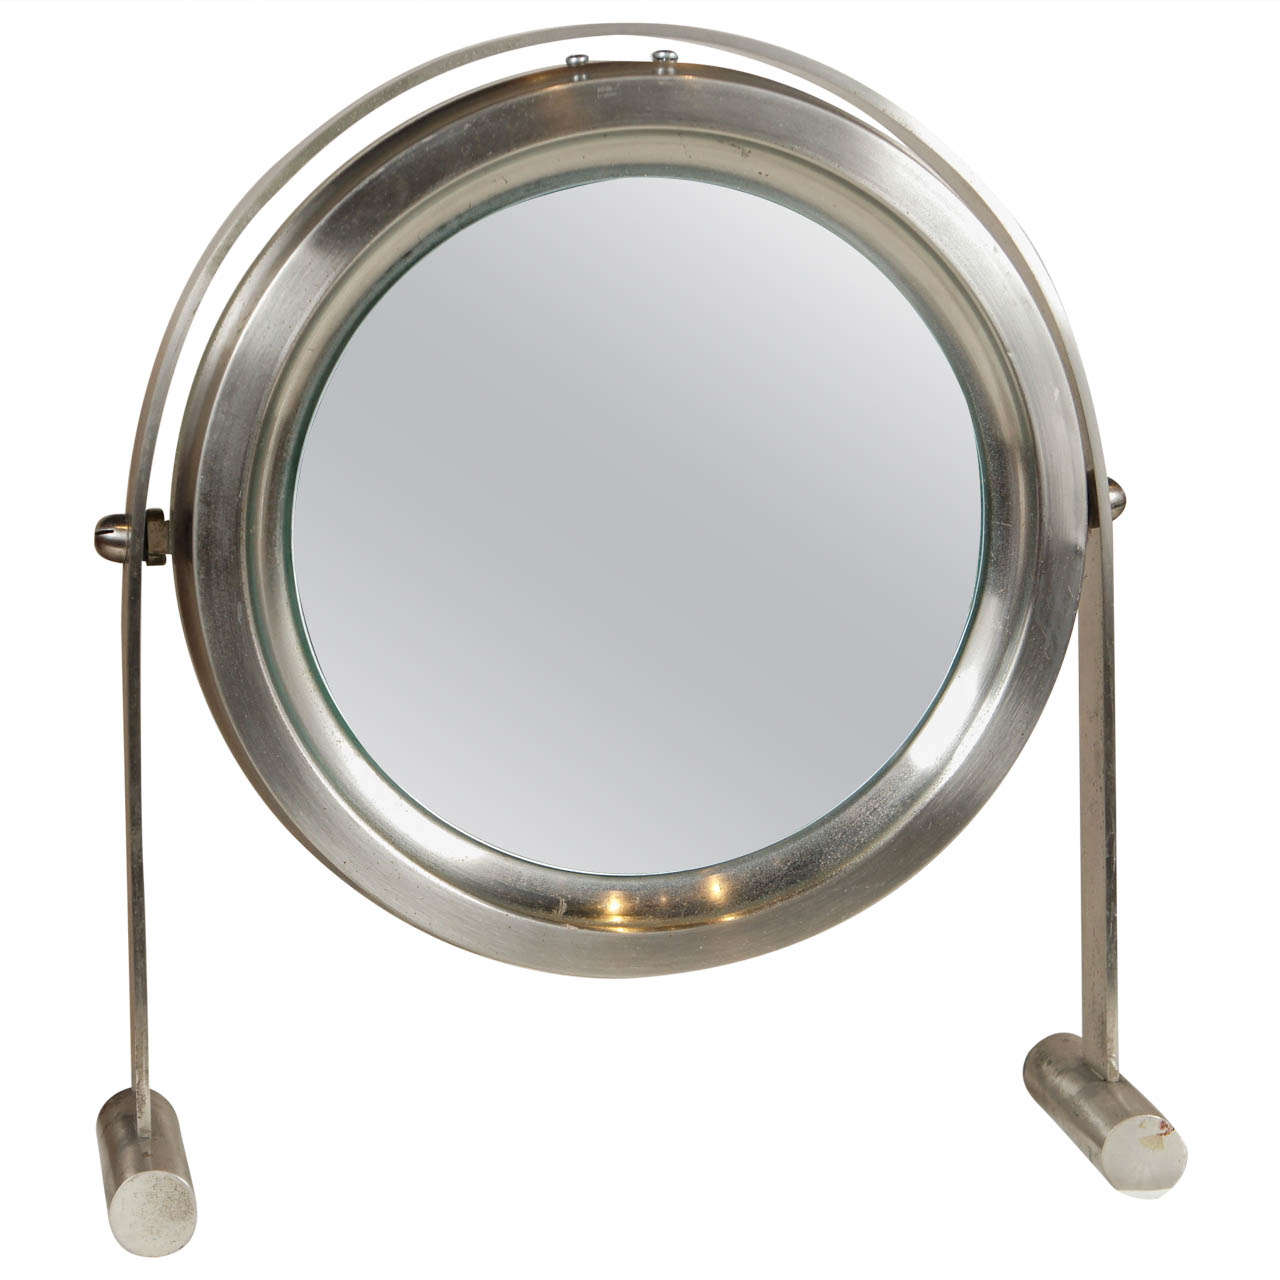 Stainless Steel Mirror on Stand